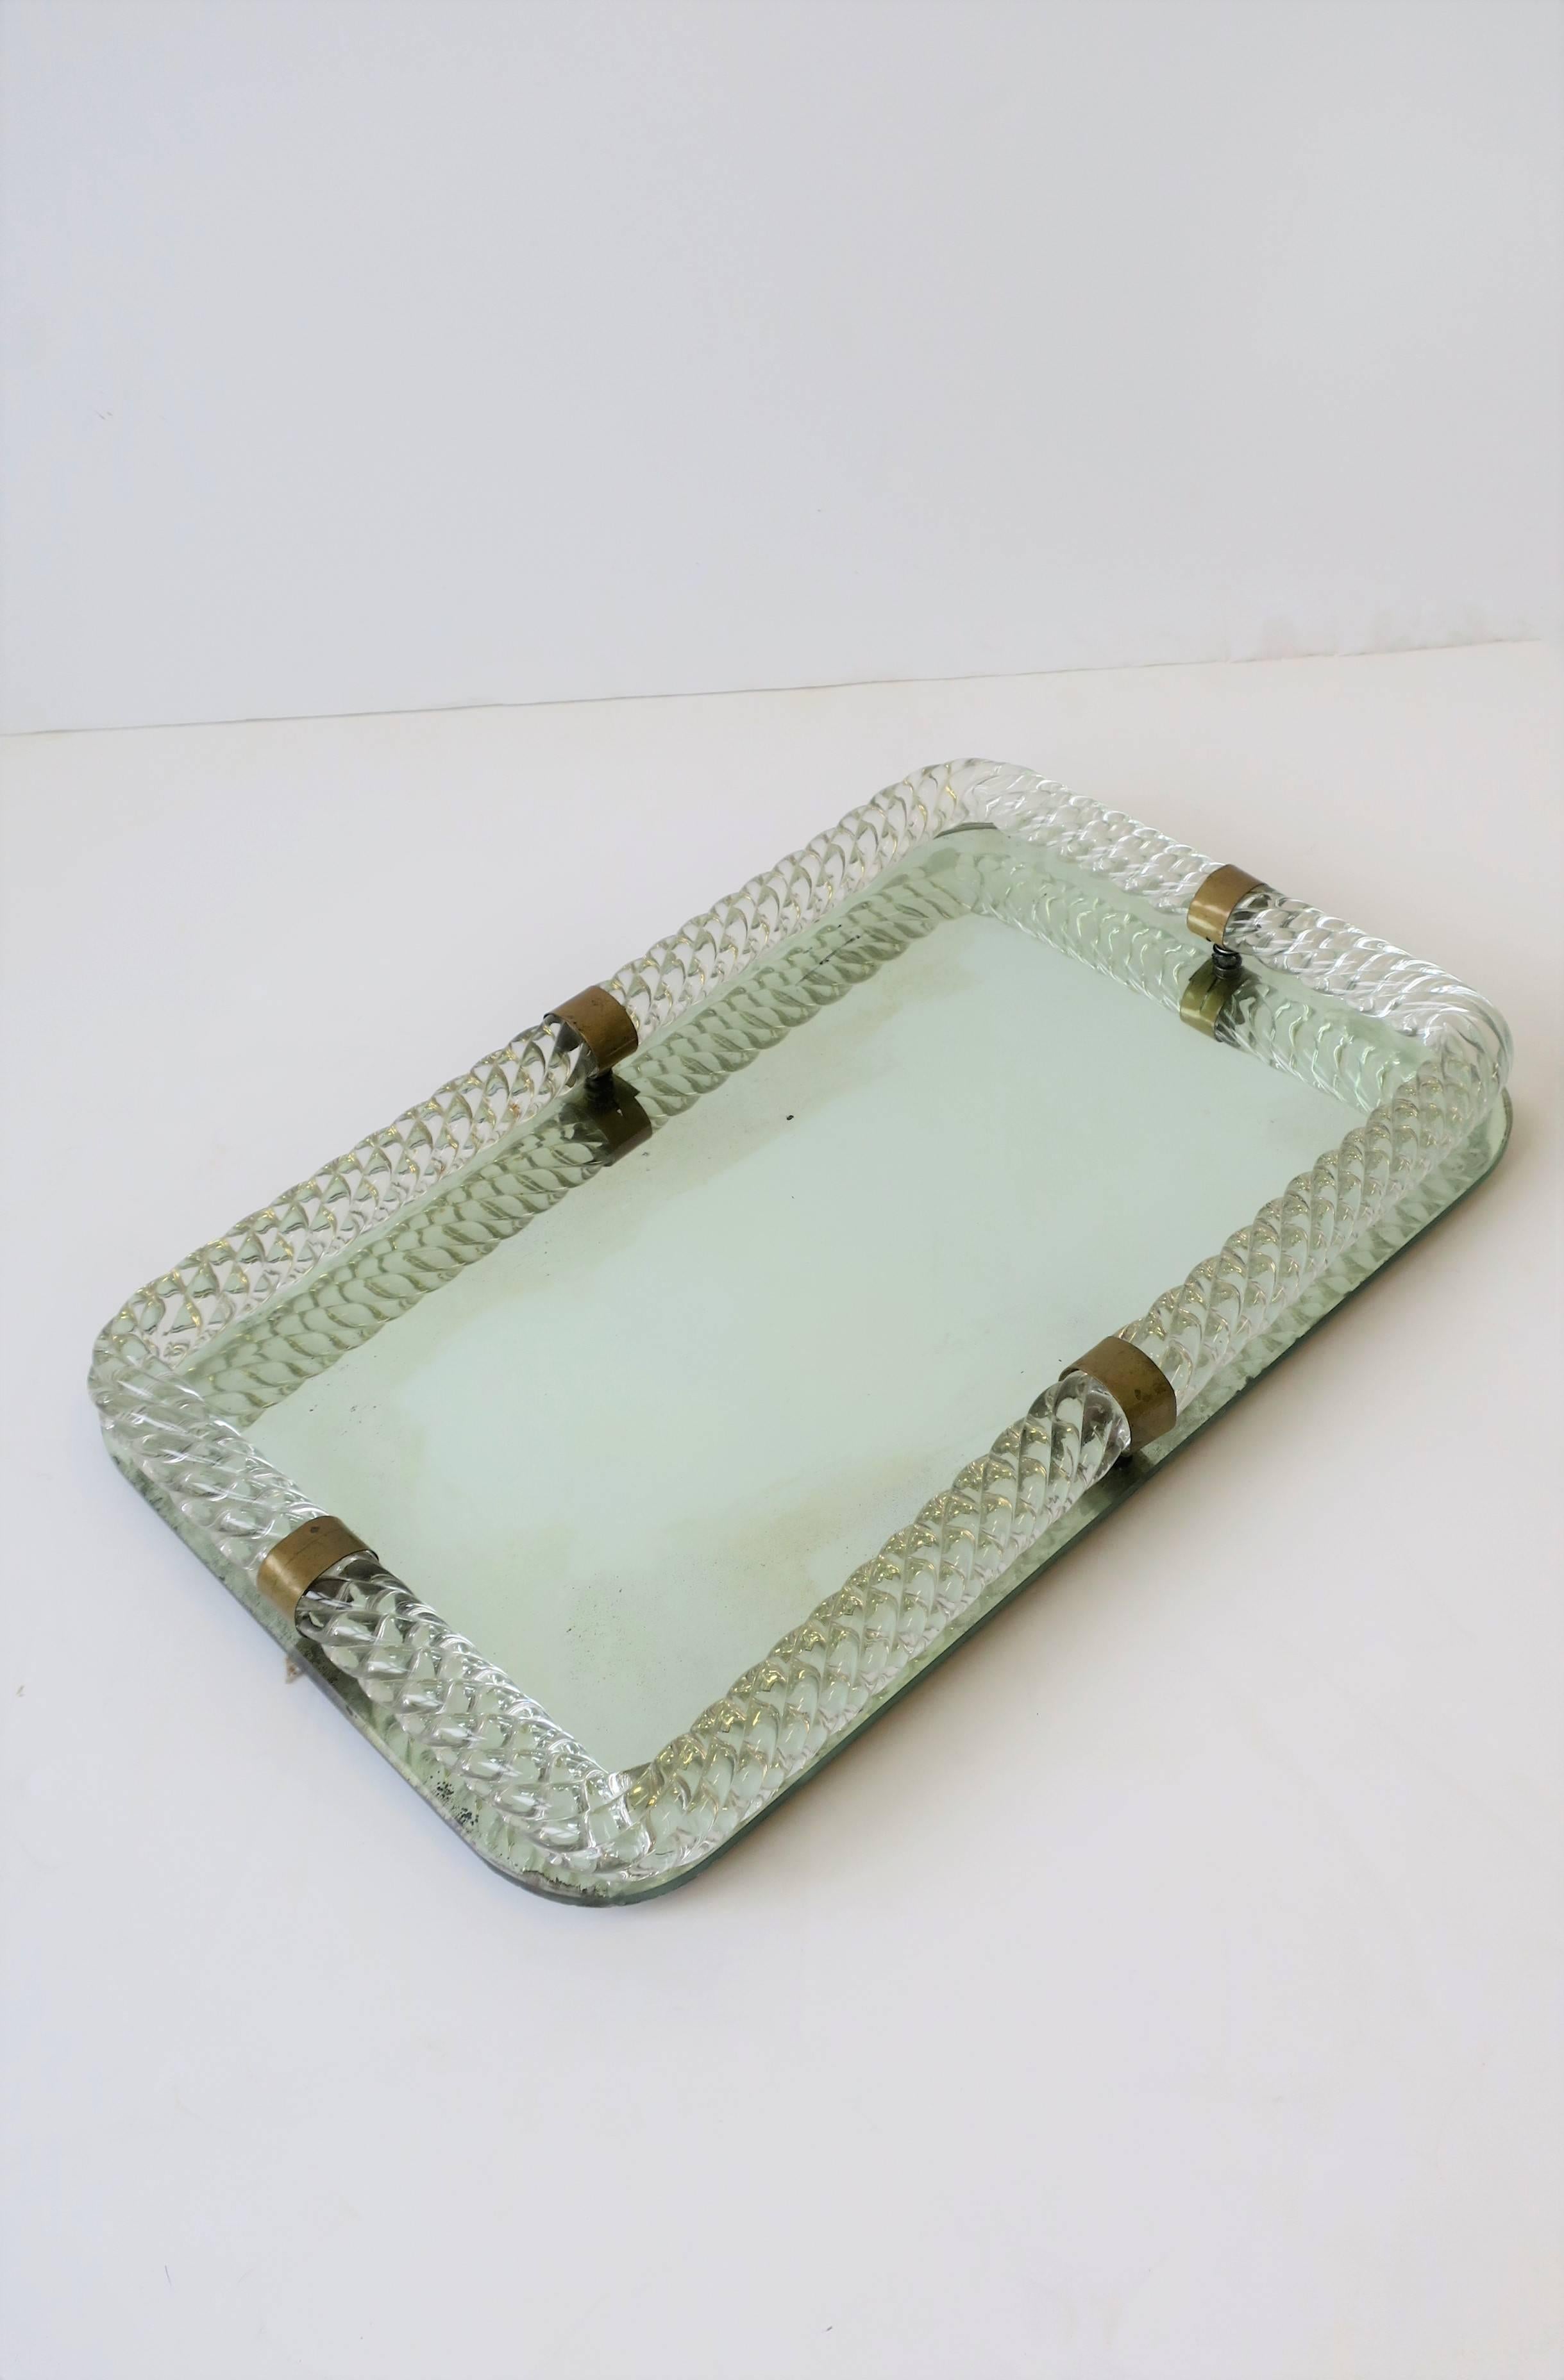 A beautiful Italian Murano art glass and mirror vanity tray with brass loop detailing, in the style of Vinini, circa Mid-20th Century, Italy.

Tray measures: 16 in. W x 10 in. D x 1.75 in. H

